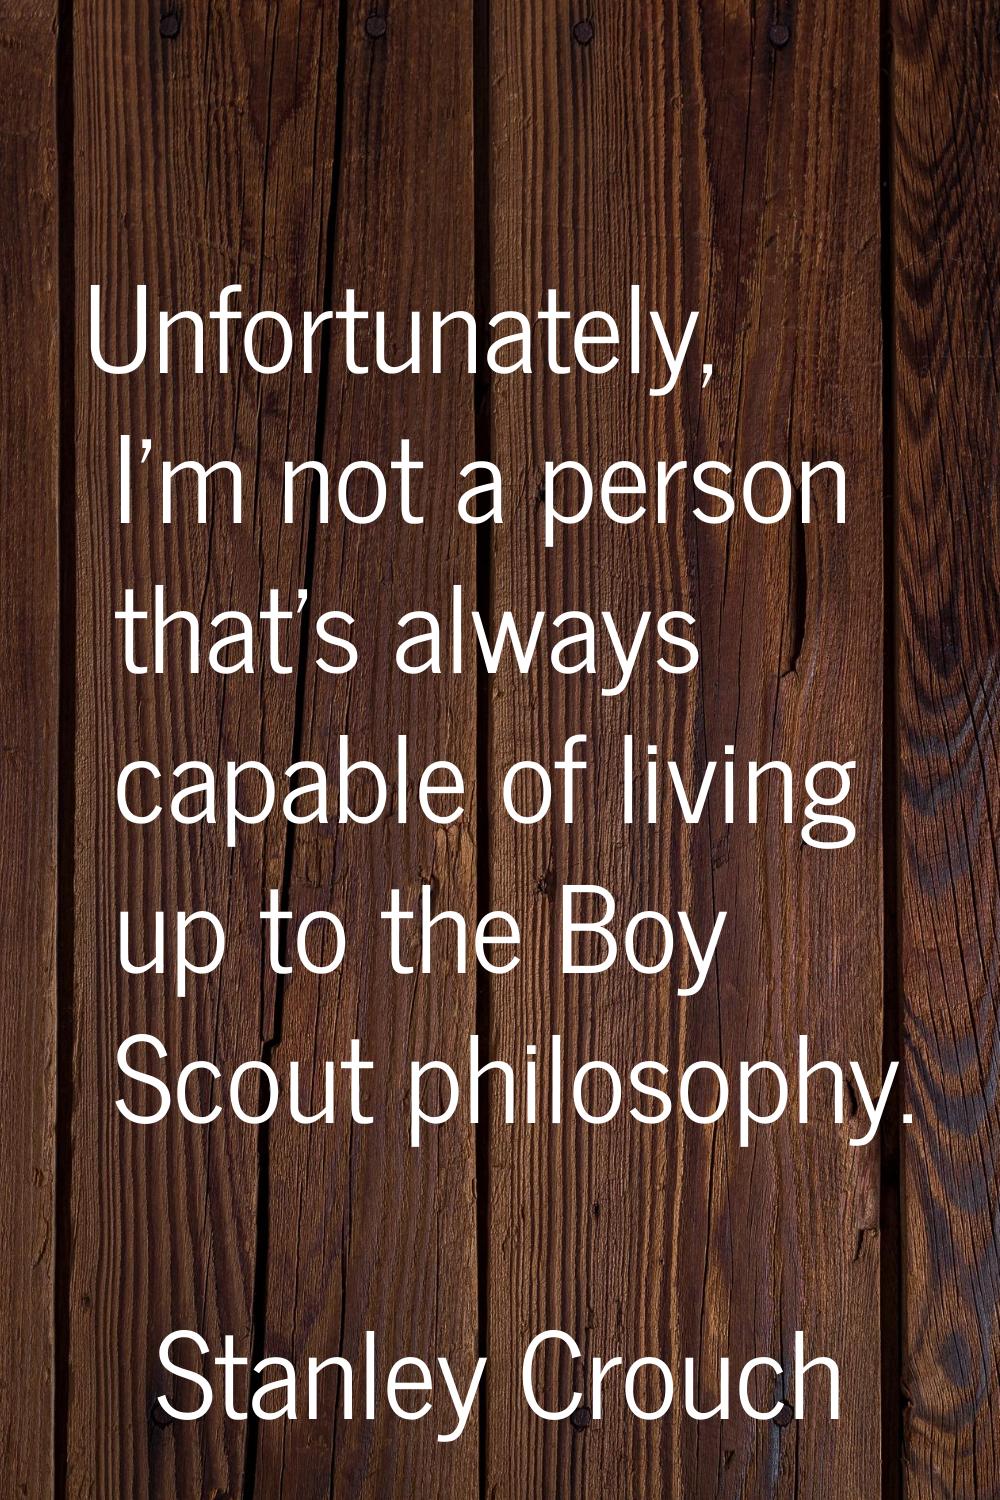 Unfortunately, I'm not a person that's always capable of living up to the Boy Scout philosophy.